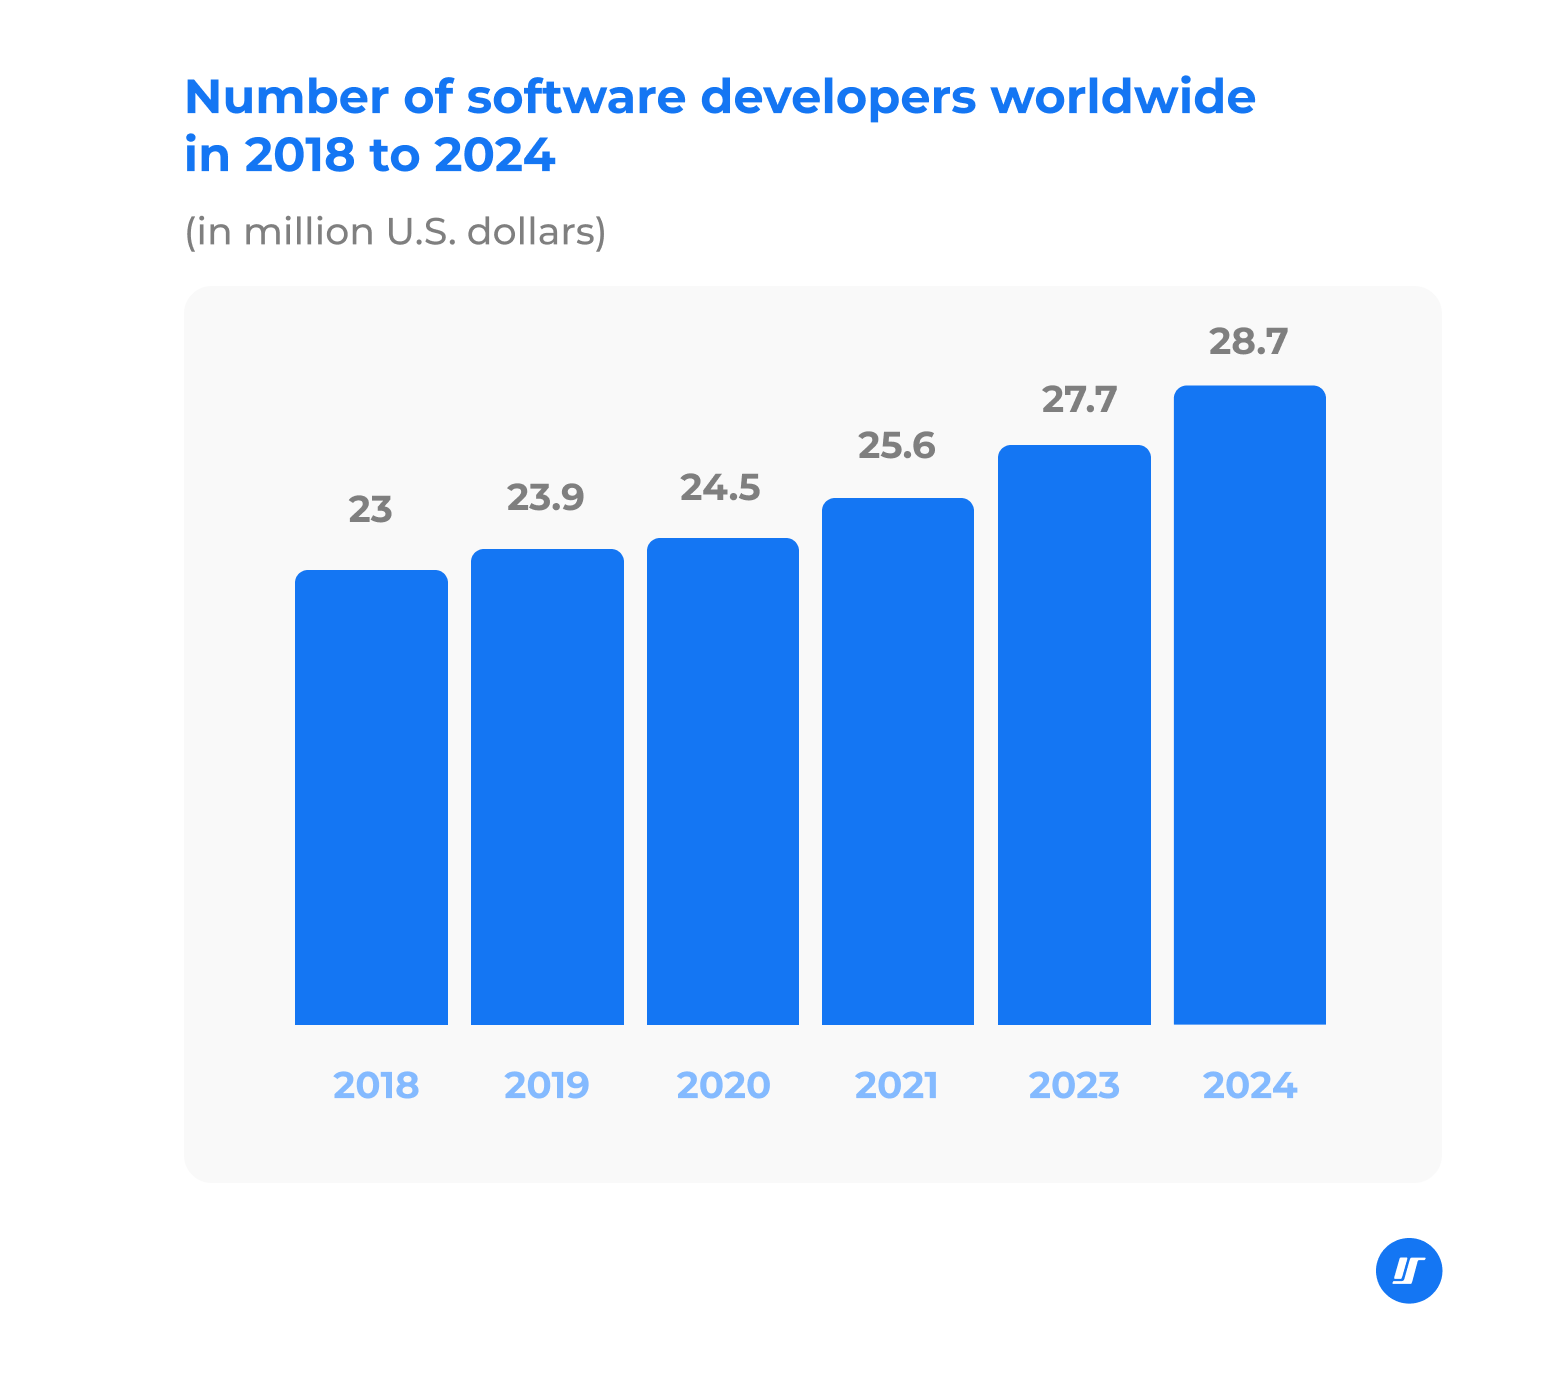 Number of software developers worldwide chart, in 2018 to 2024